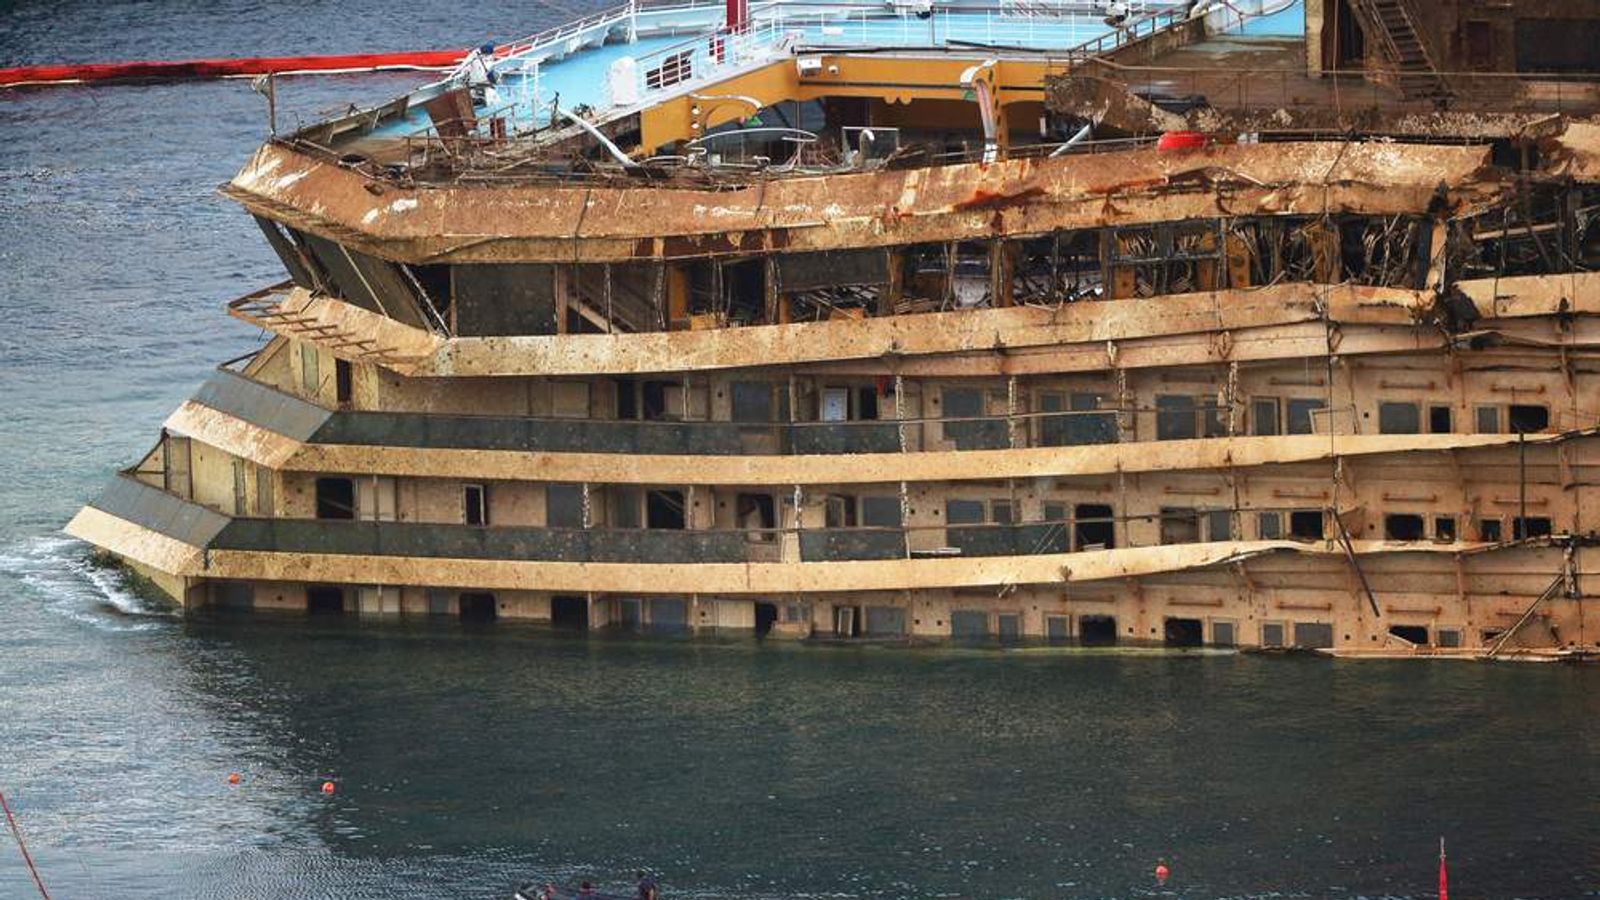 Costa Concordia How The Disaster Unfolded